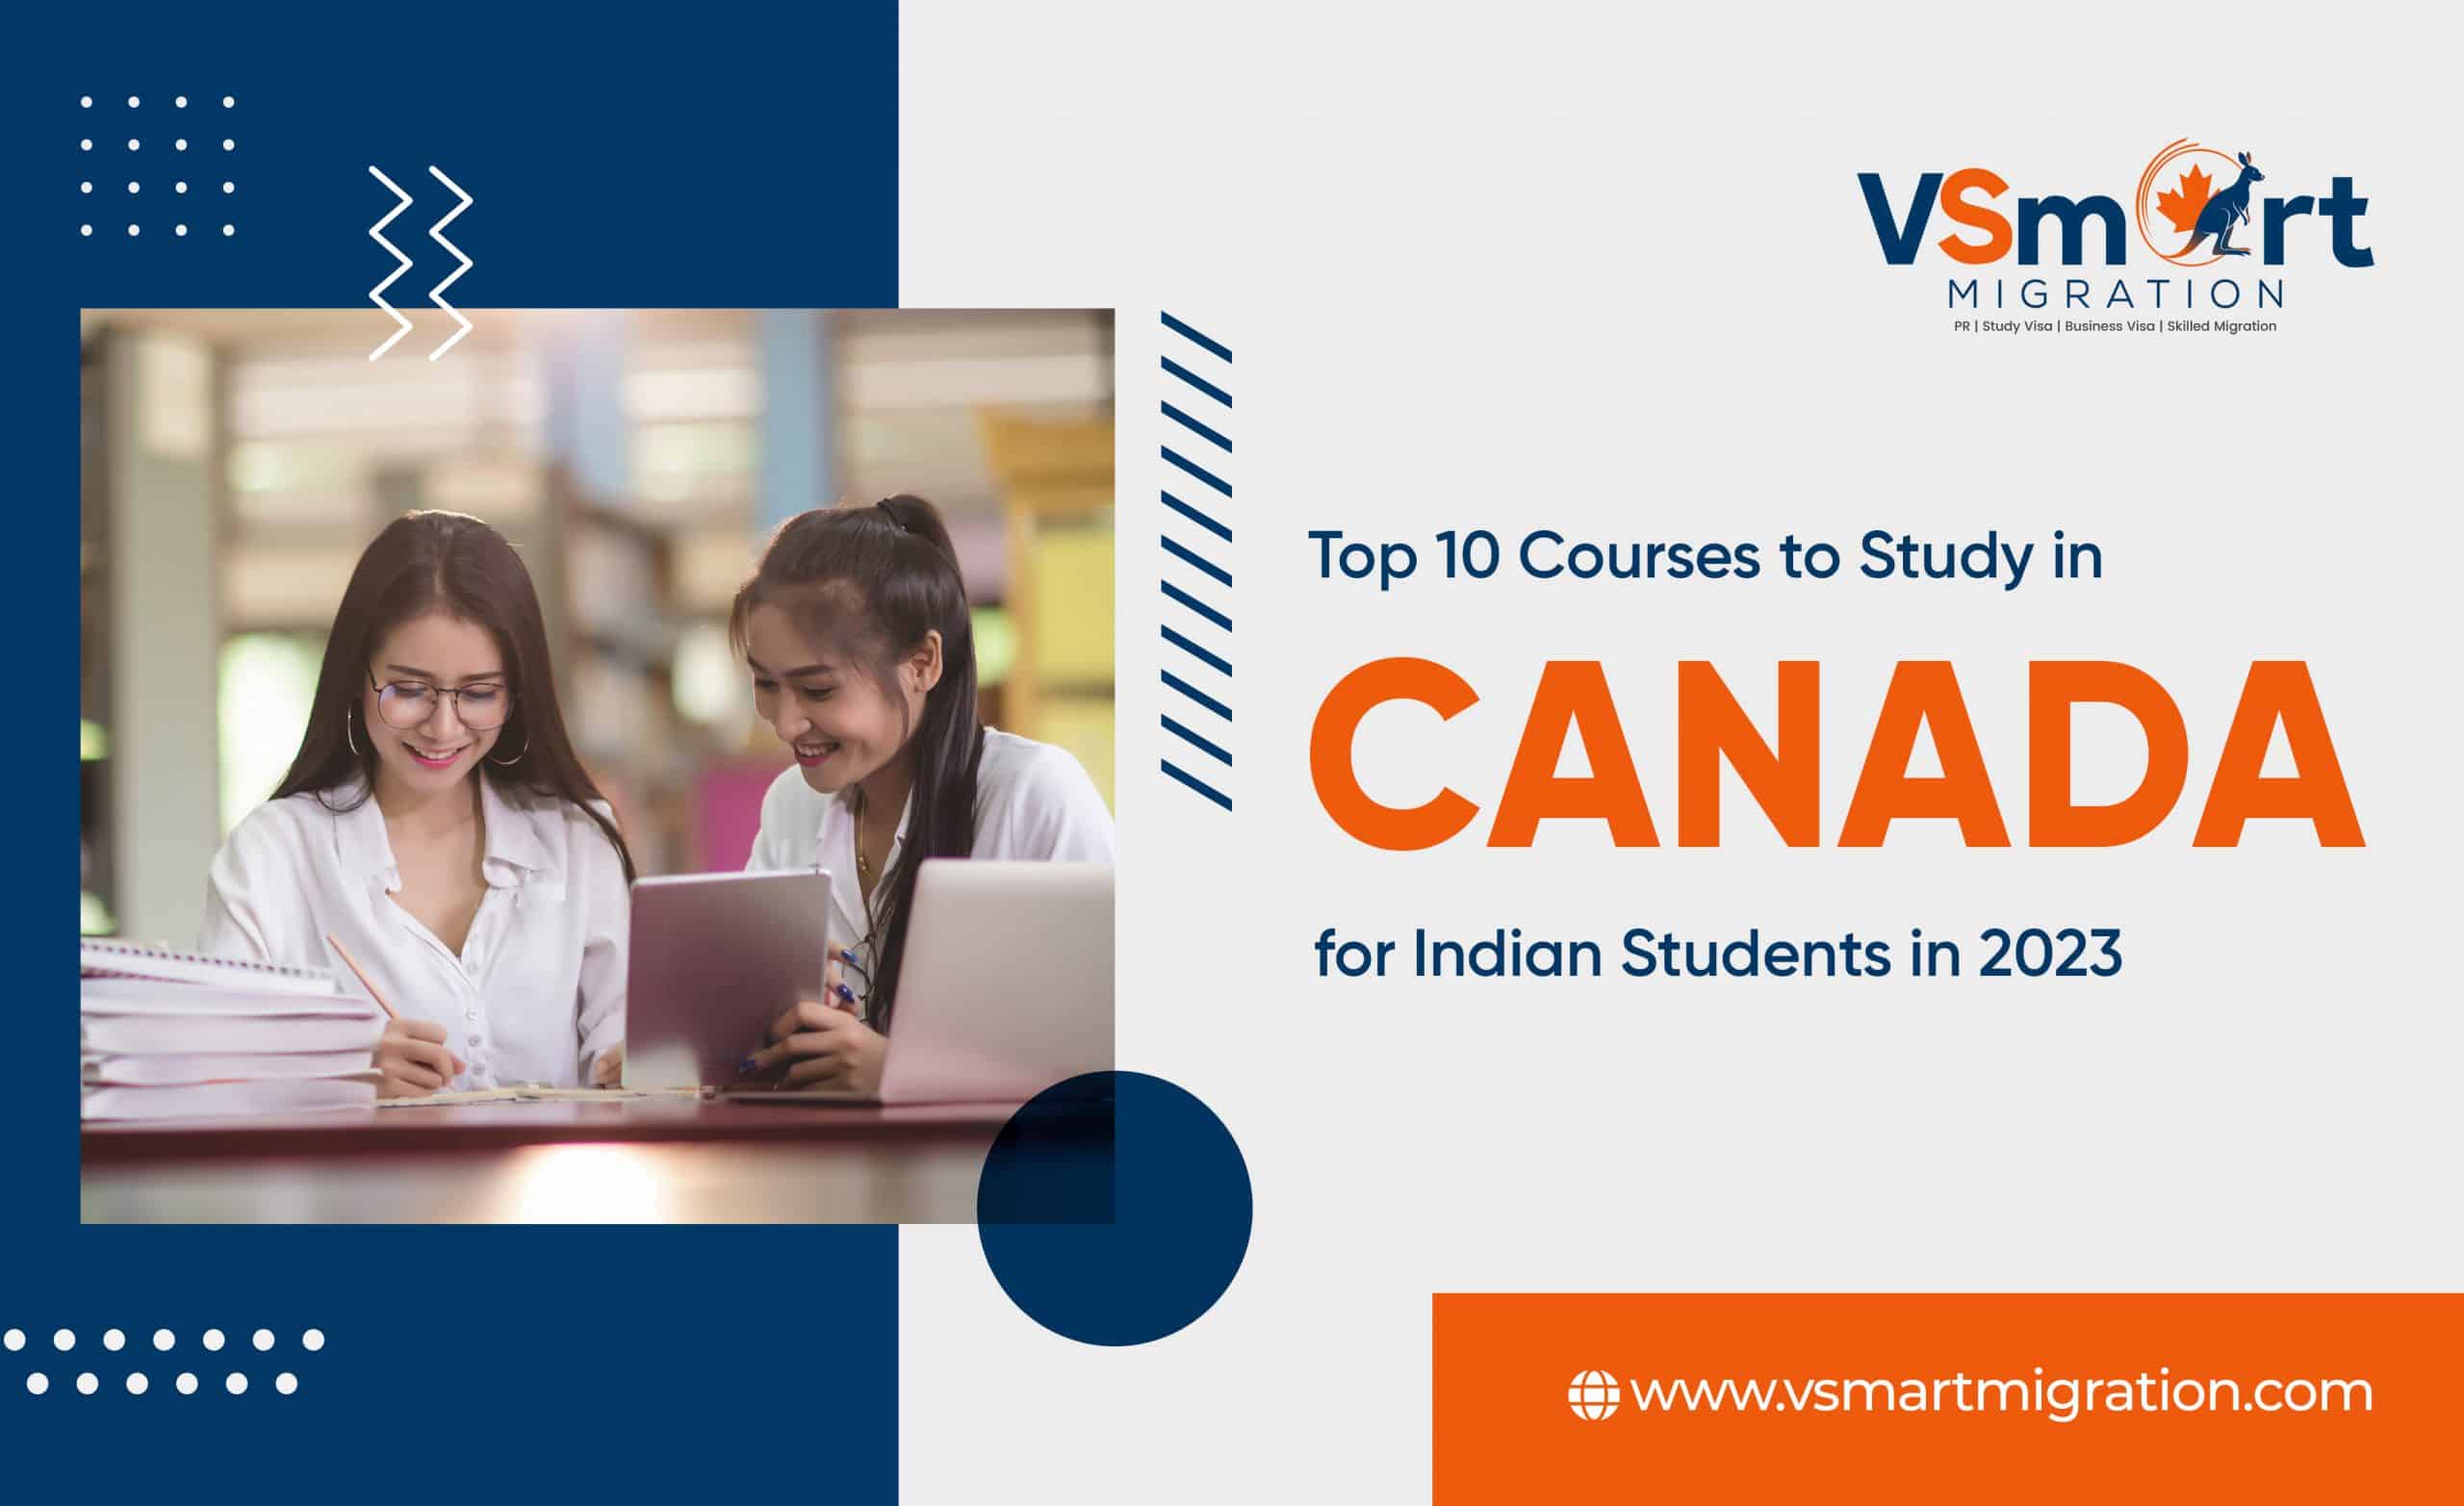 Top 10 Courses to Study in Canada for Indian Students in 2023